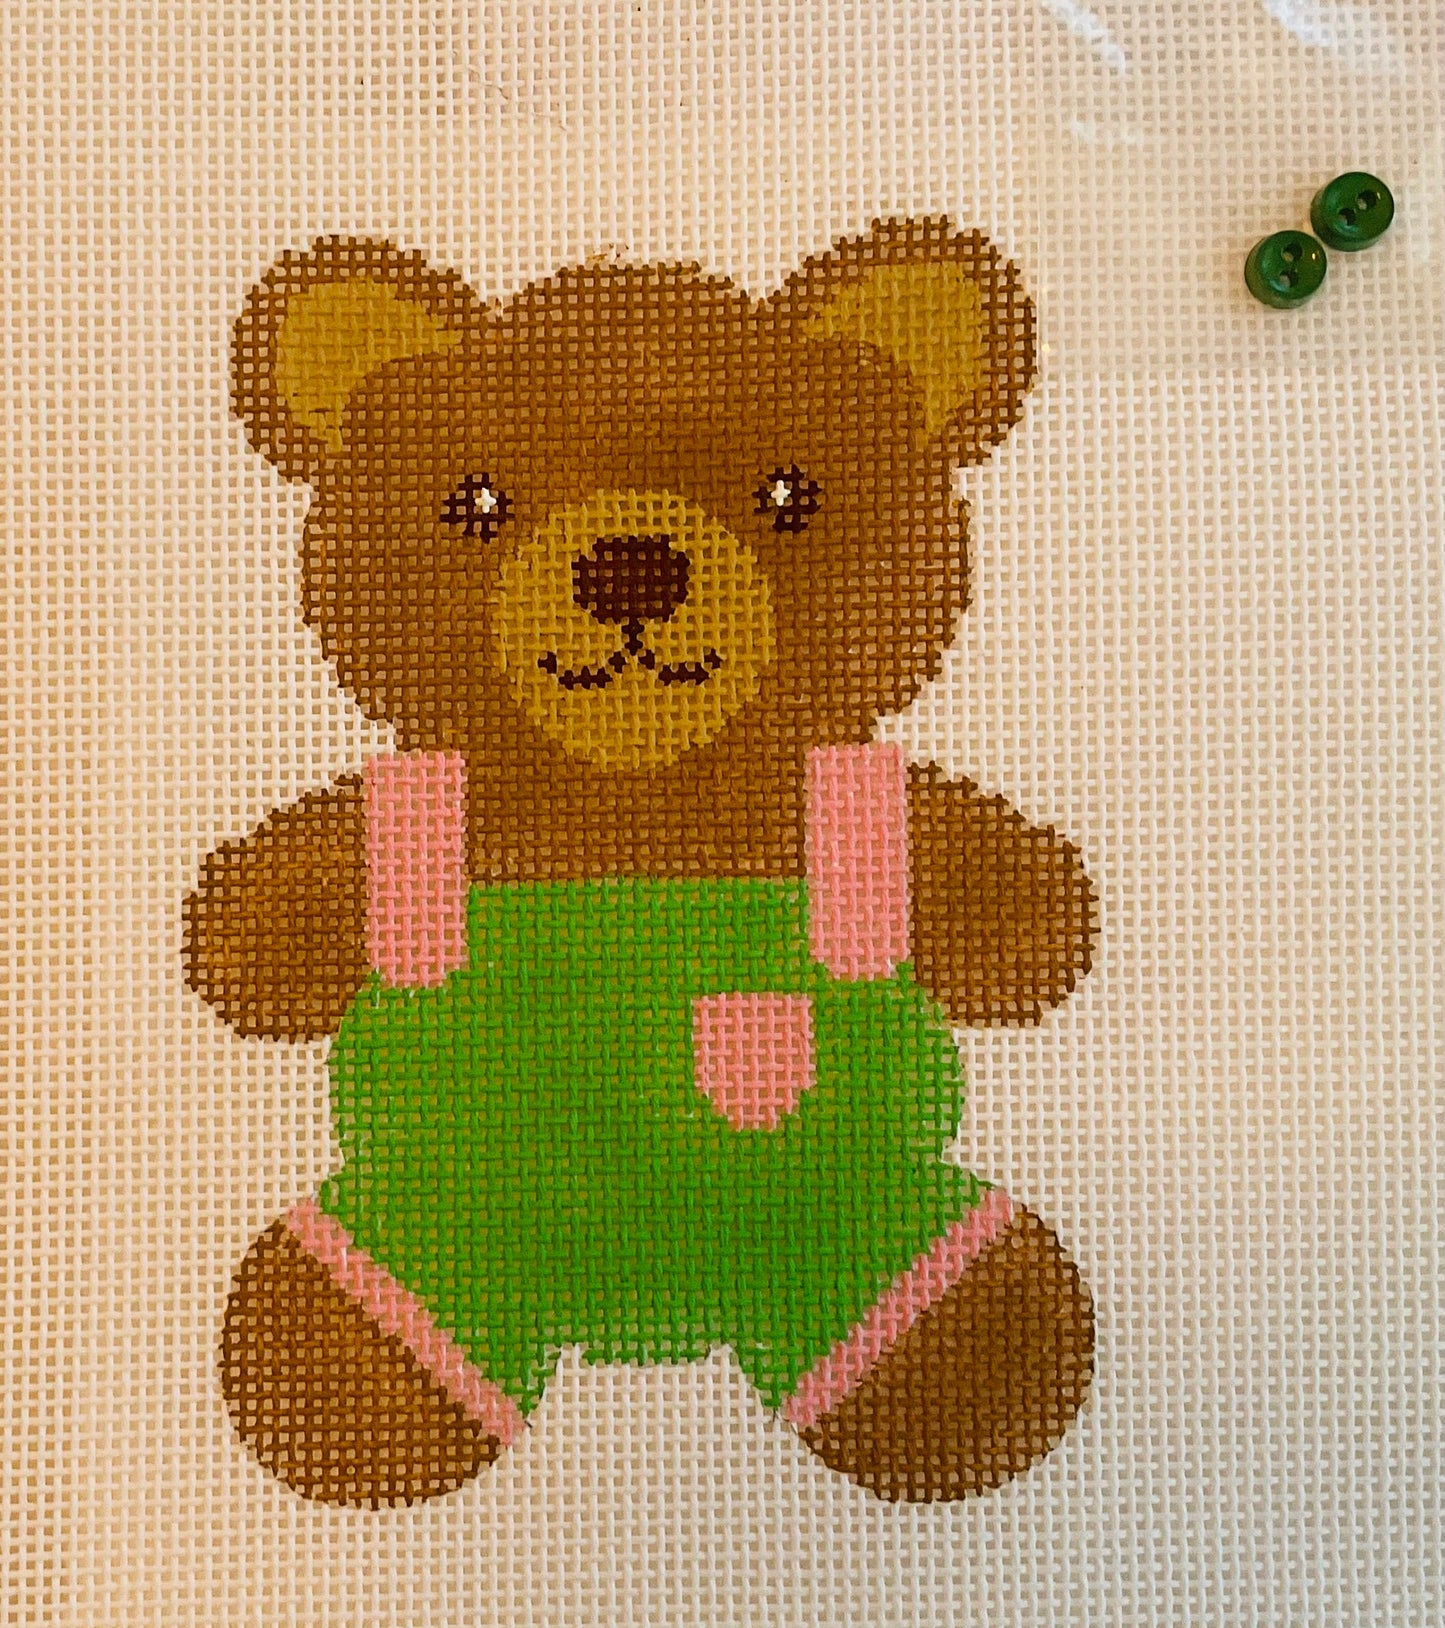 Teddy Bear Smiles Green with Stitch Guide